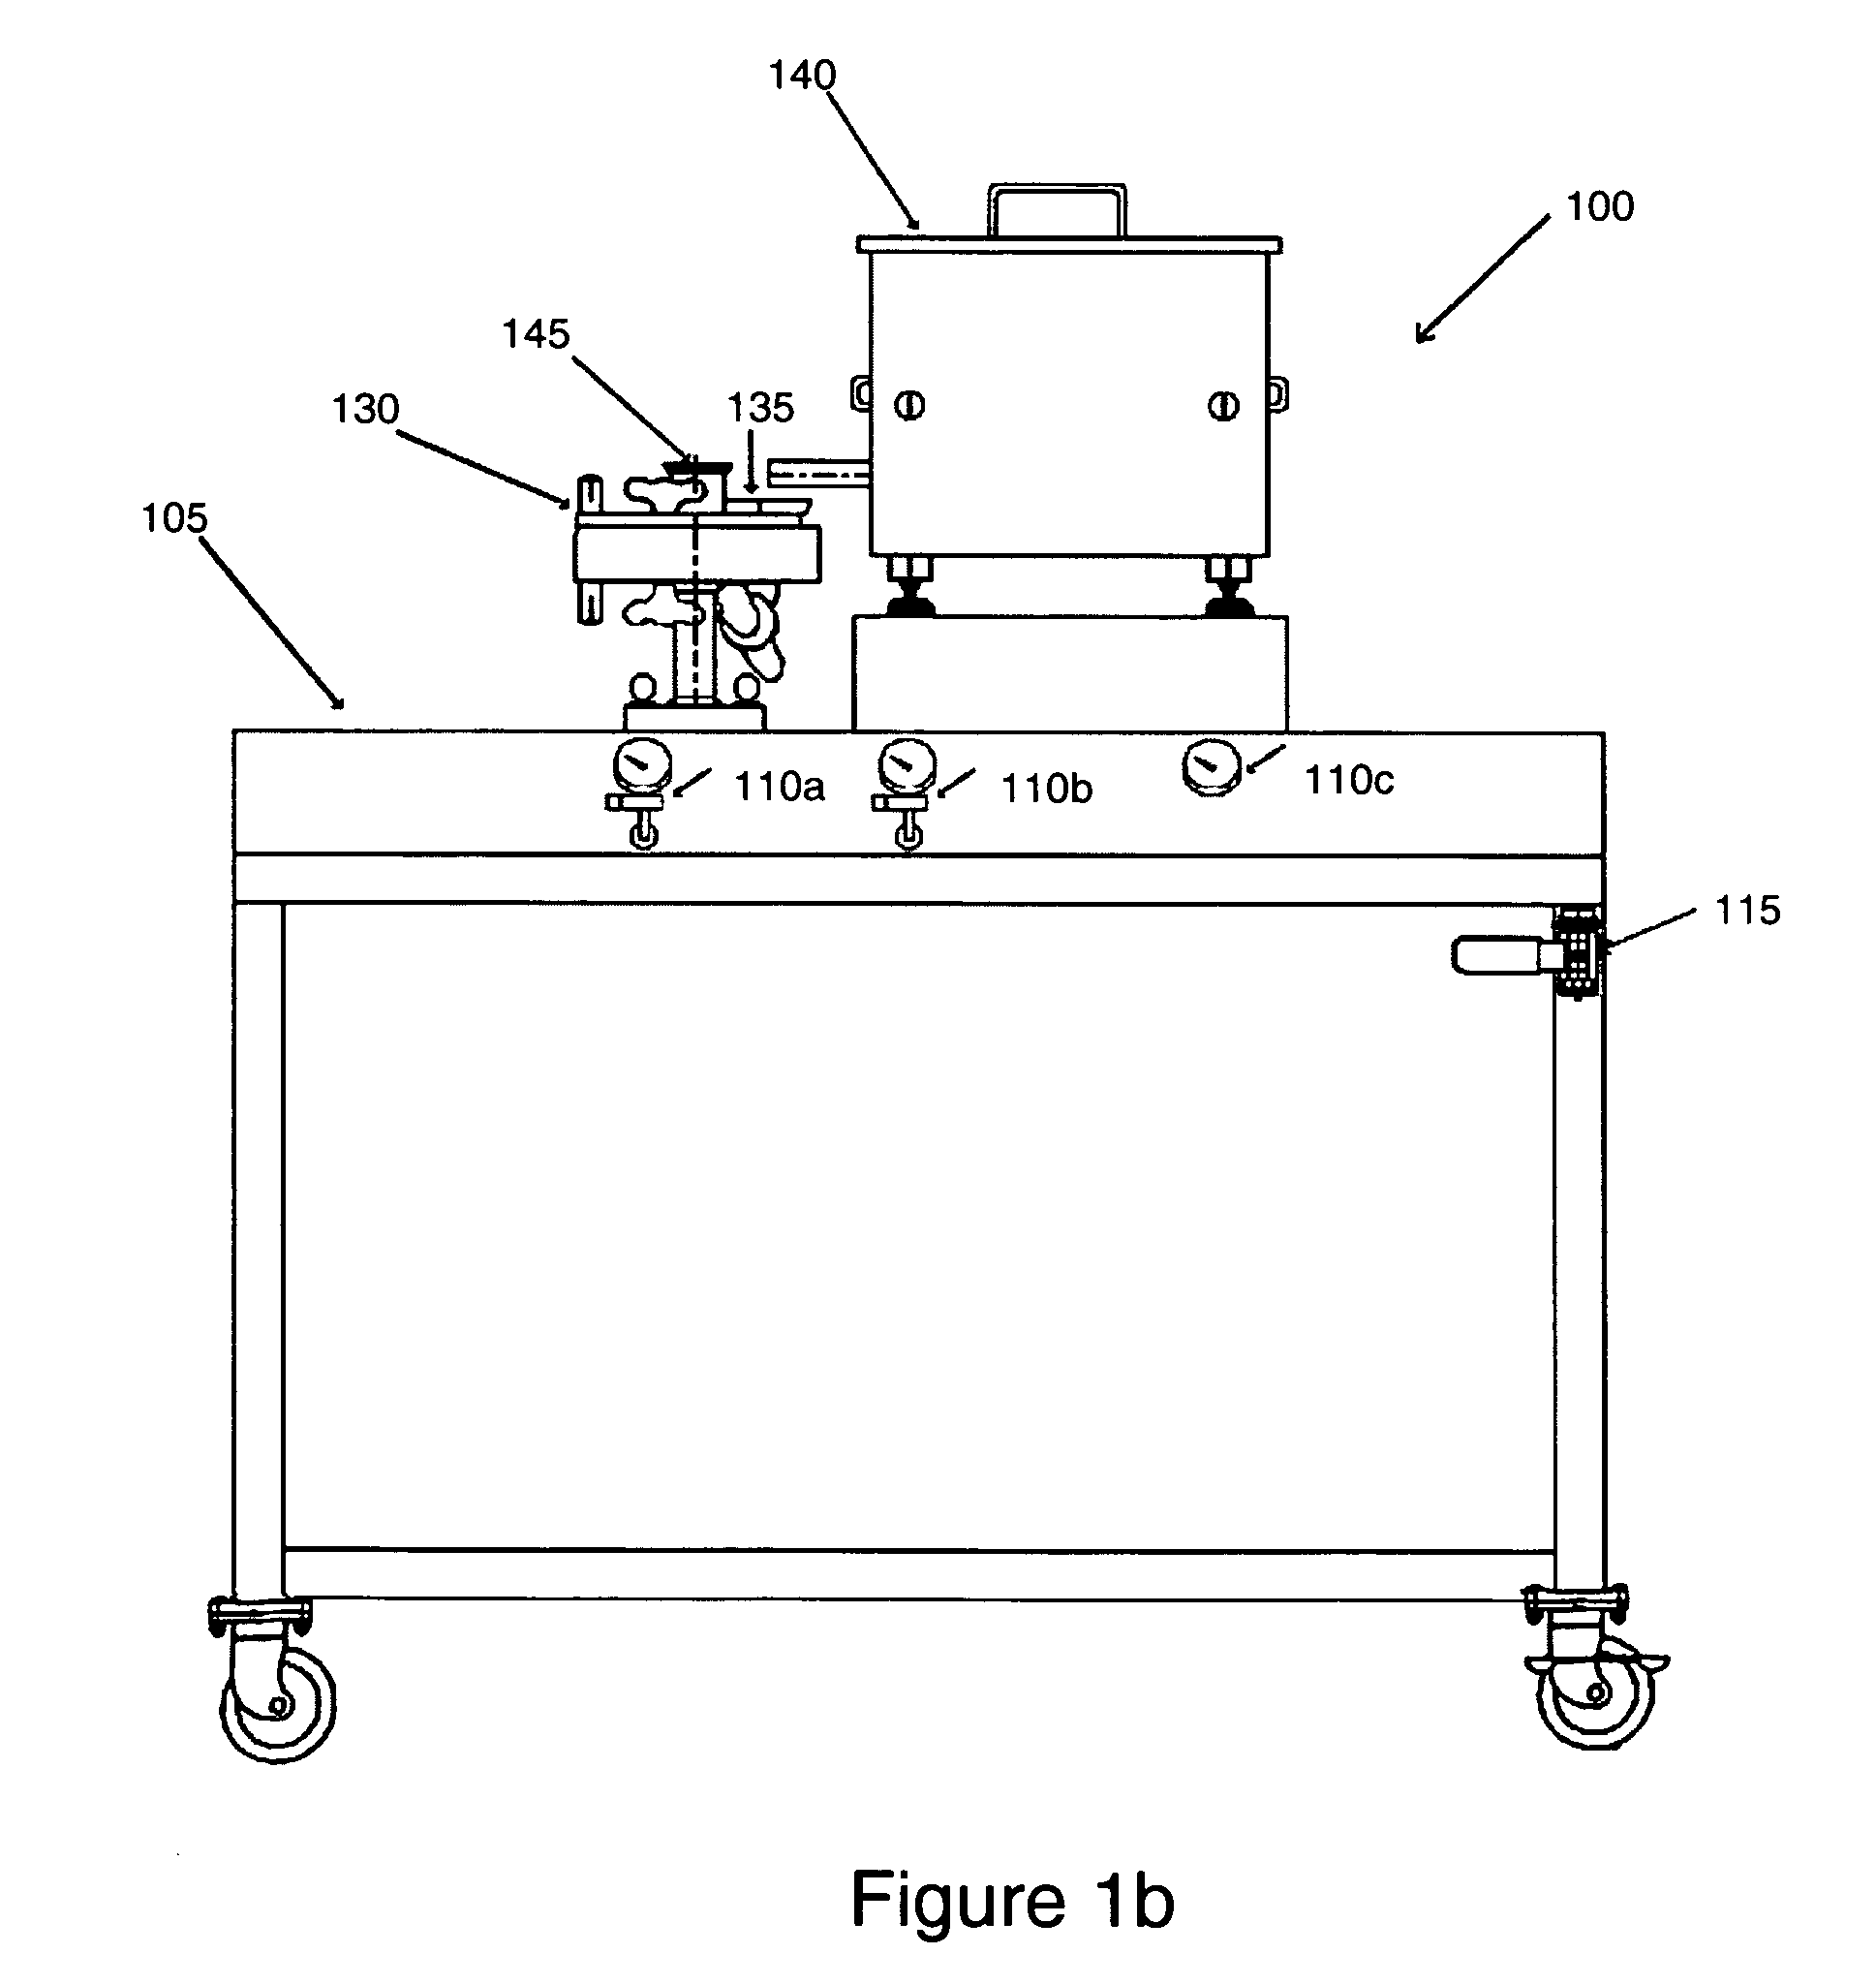 Dry-particle based adhesive and dry film and methods of making same